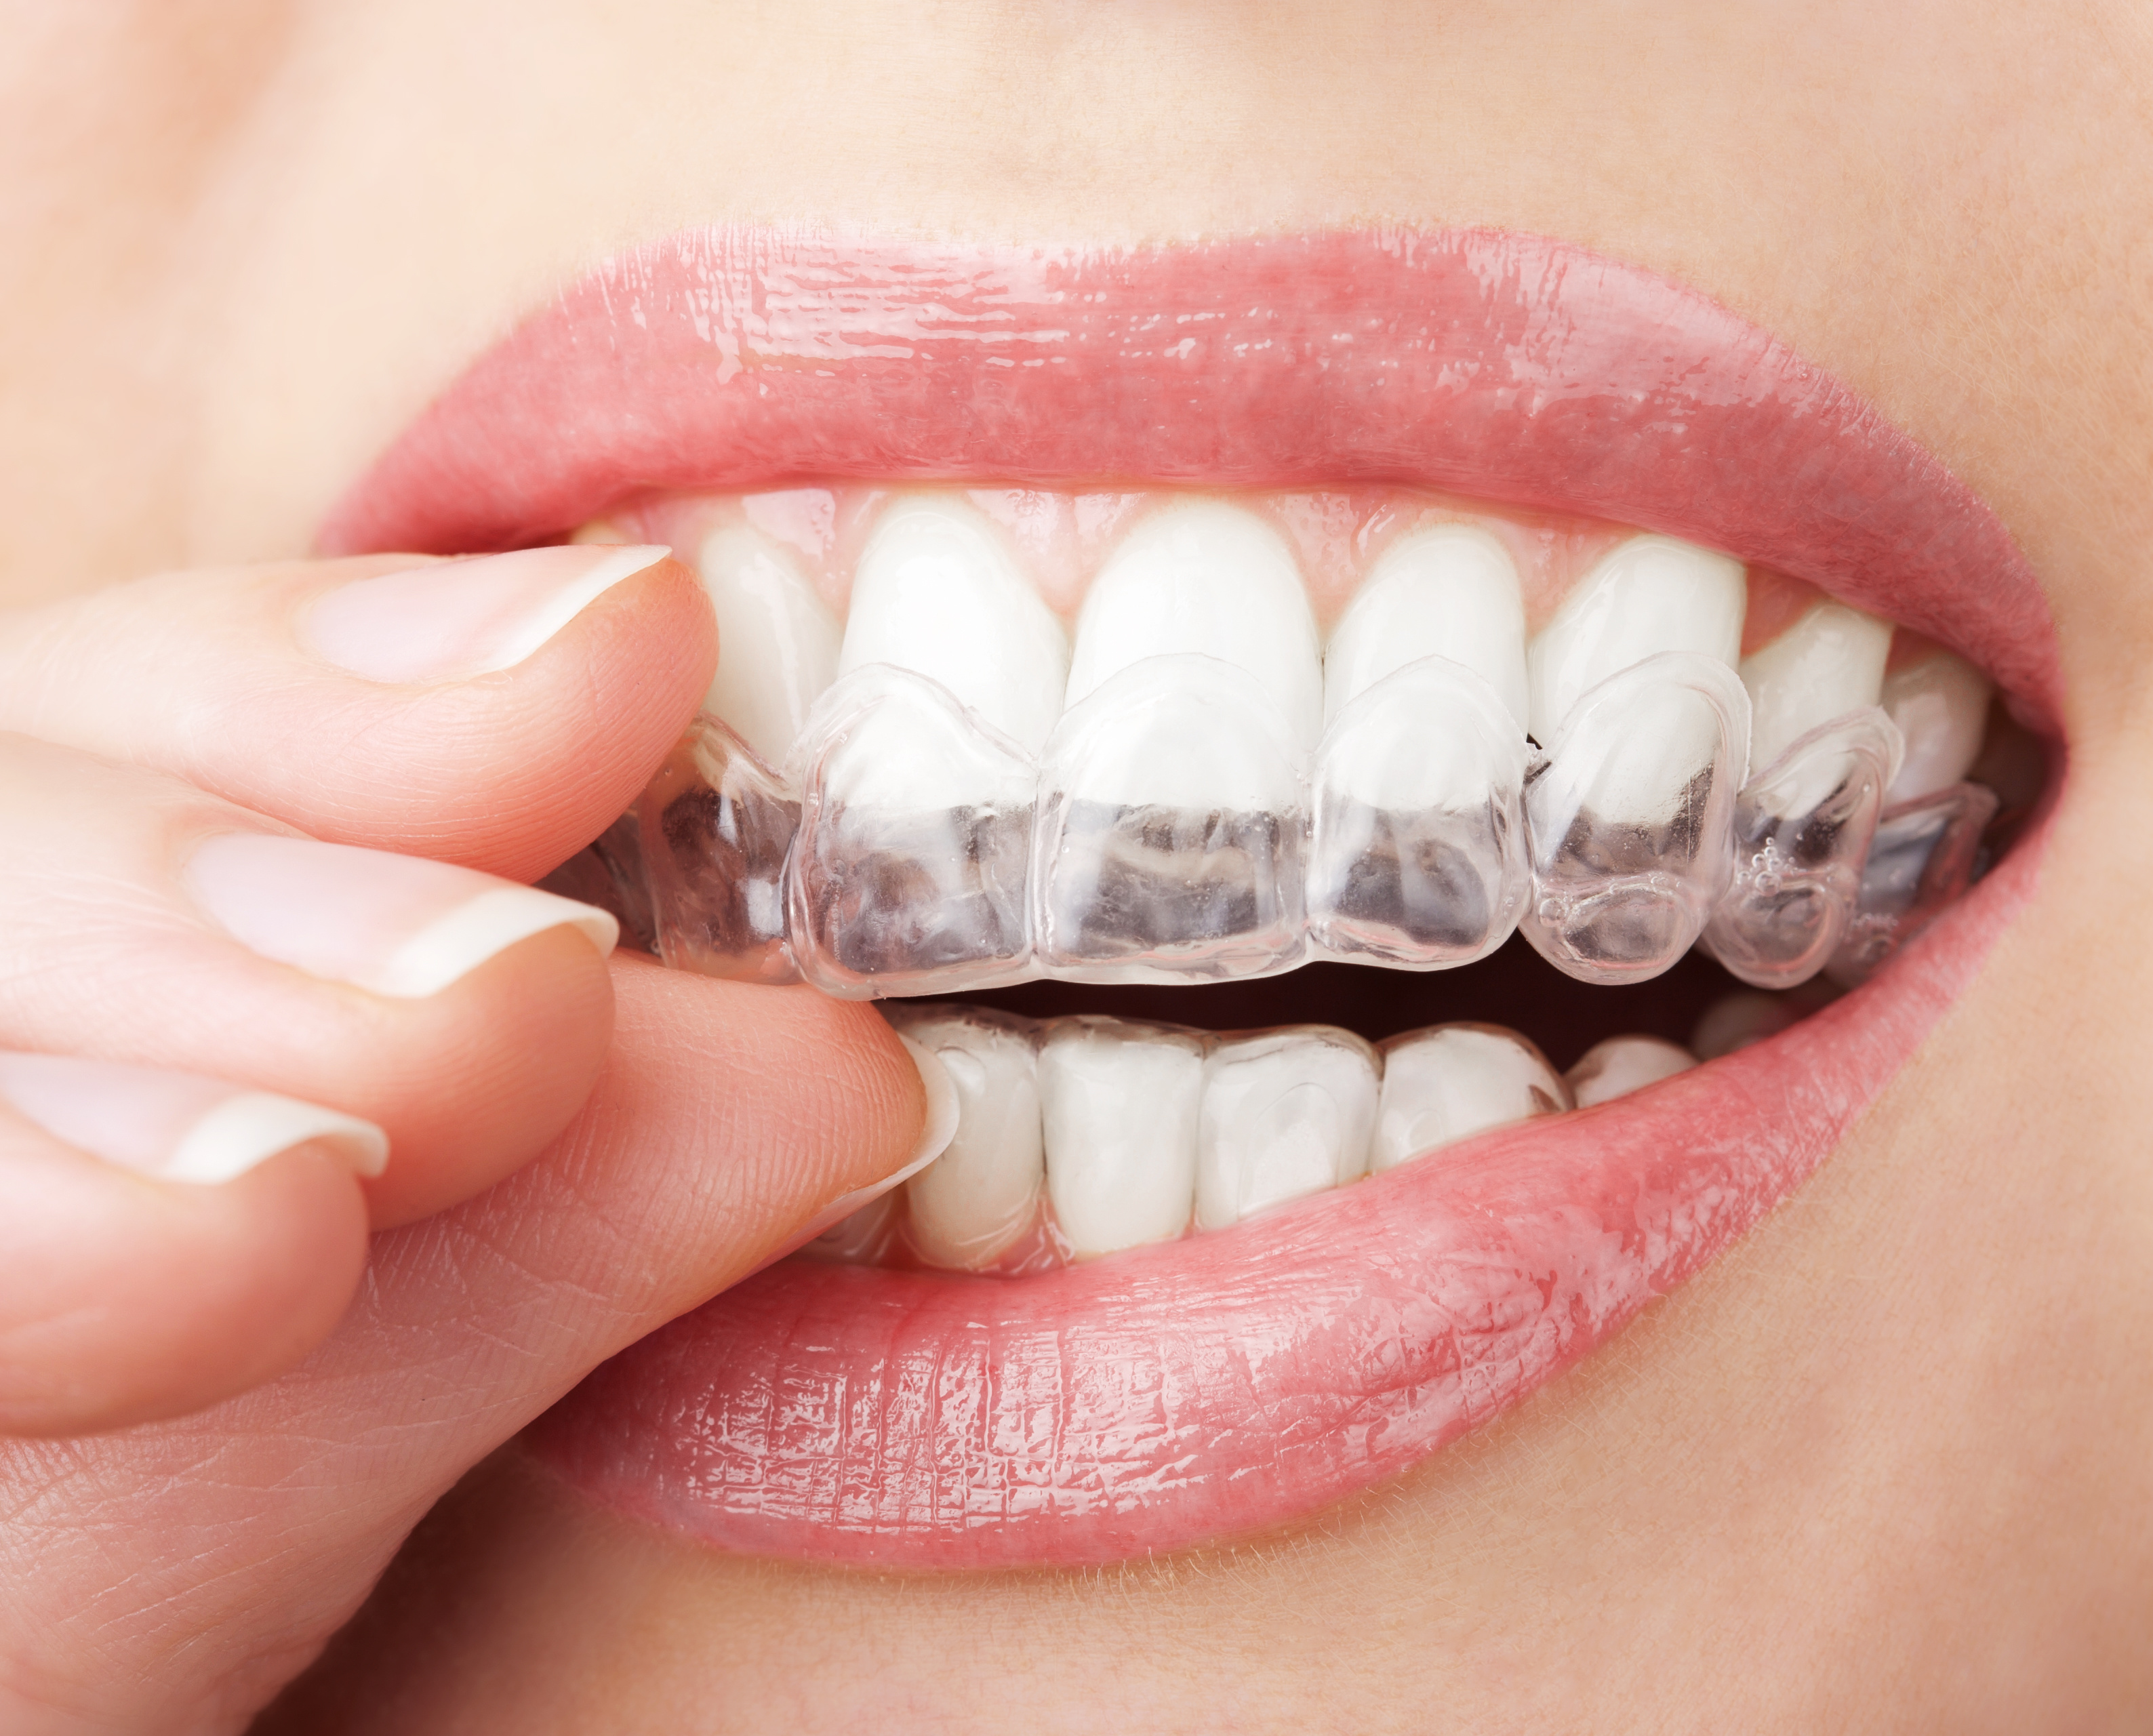 Finding a Skilled Dentist Carrying Out a Safe Invisalign Exton Treatment